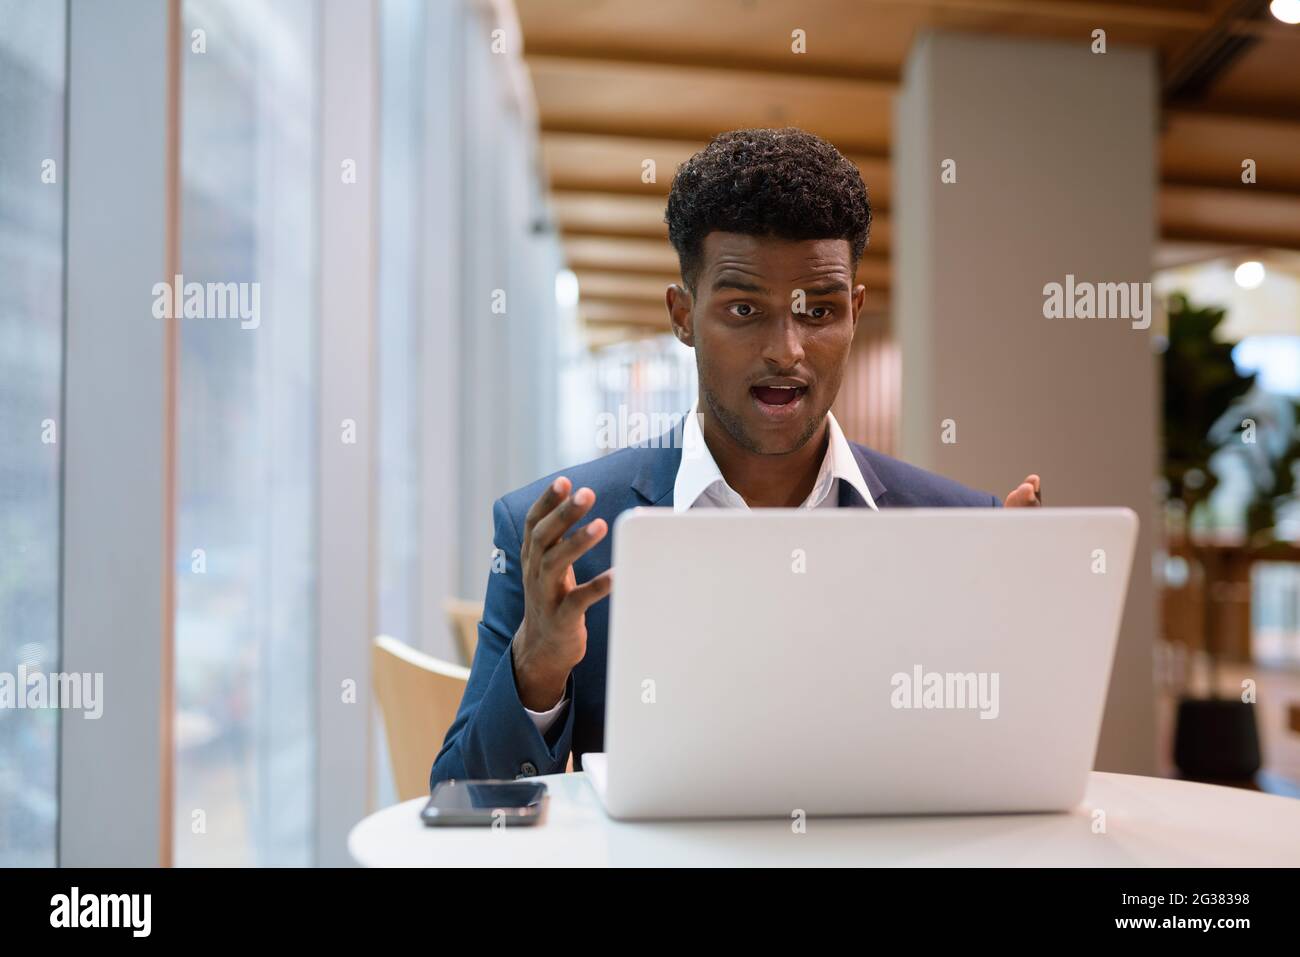 Portrait of African businessman using laptop computer in coffee shop while looking shocked and surprised horizontal shot Stock Photo